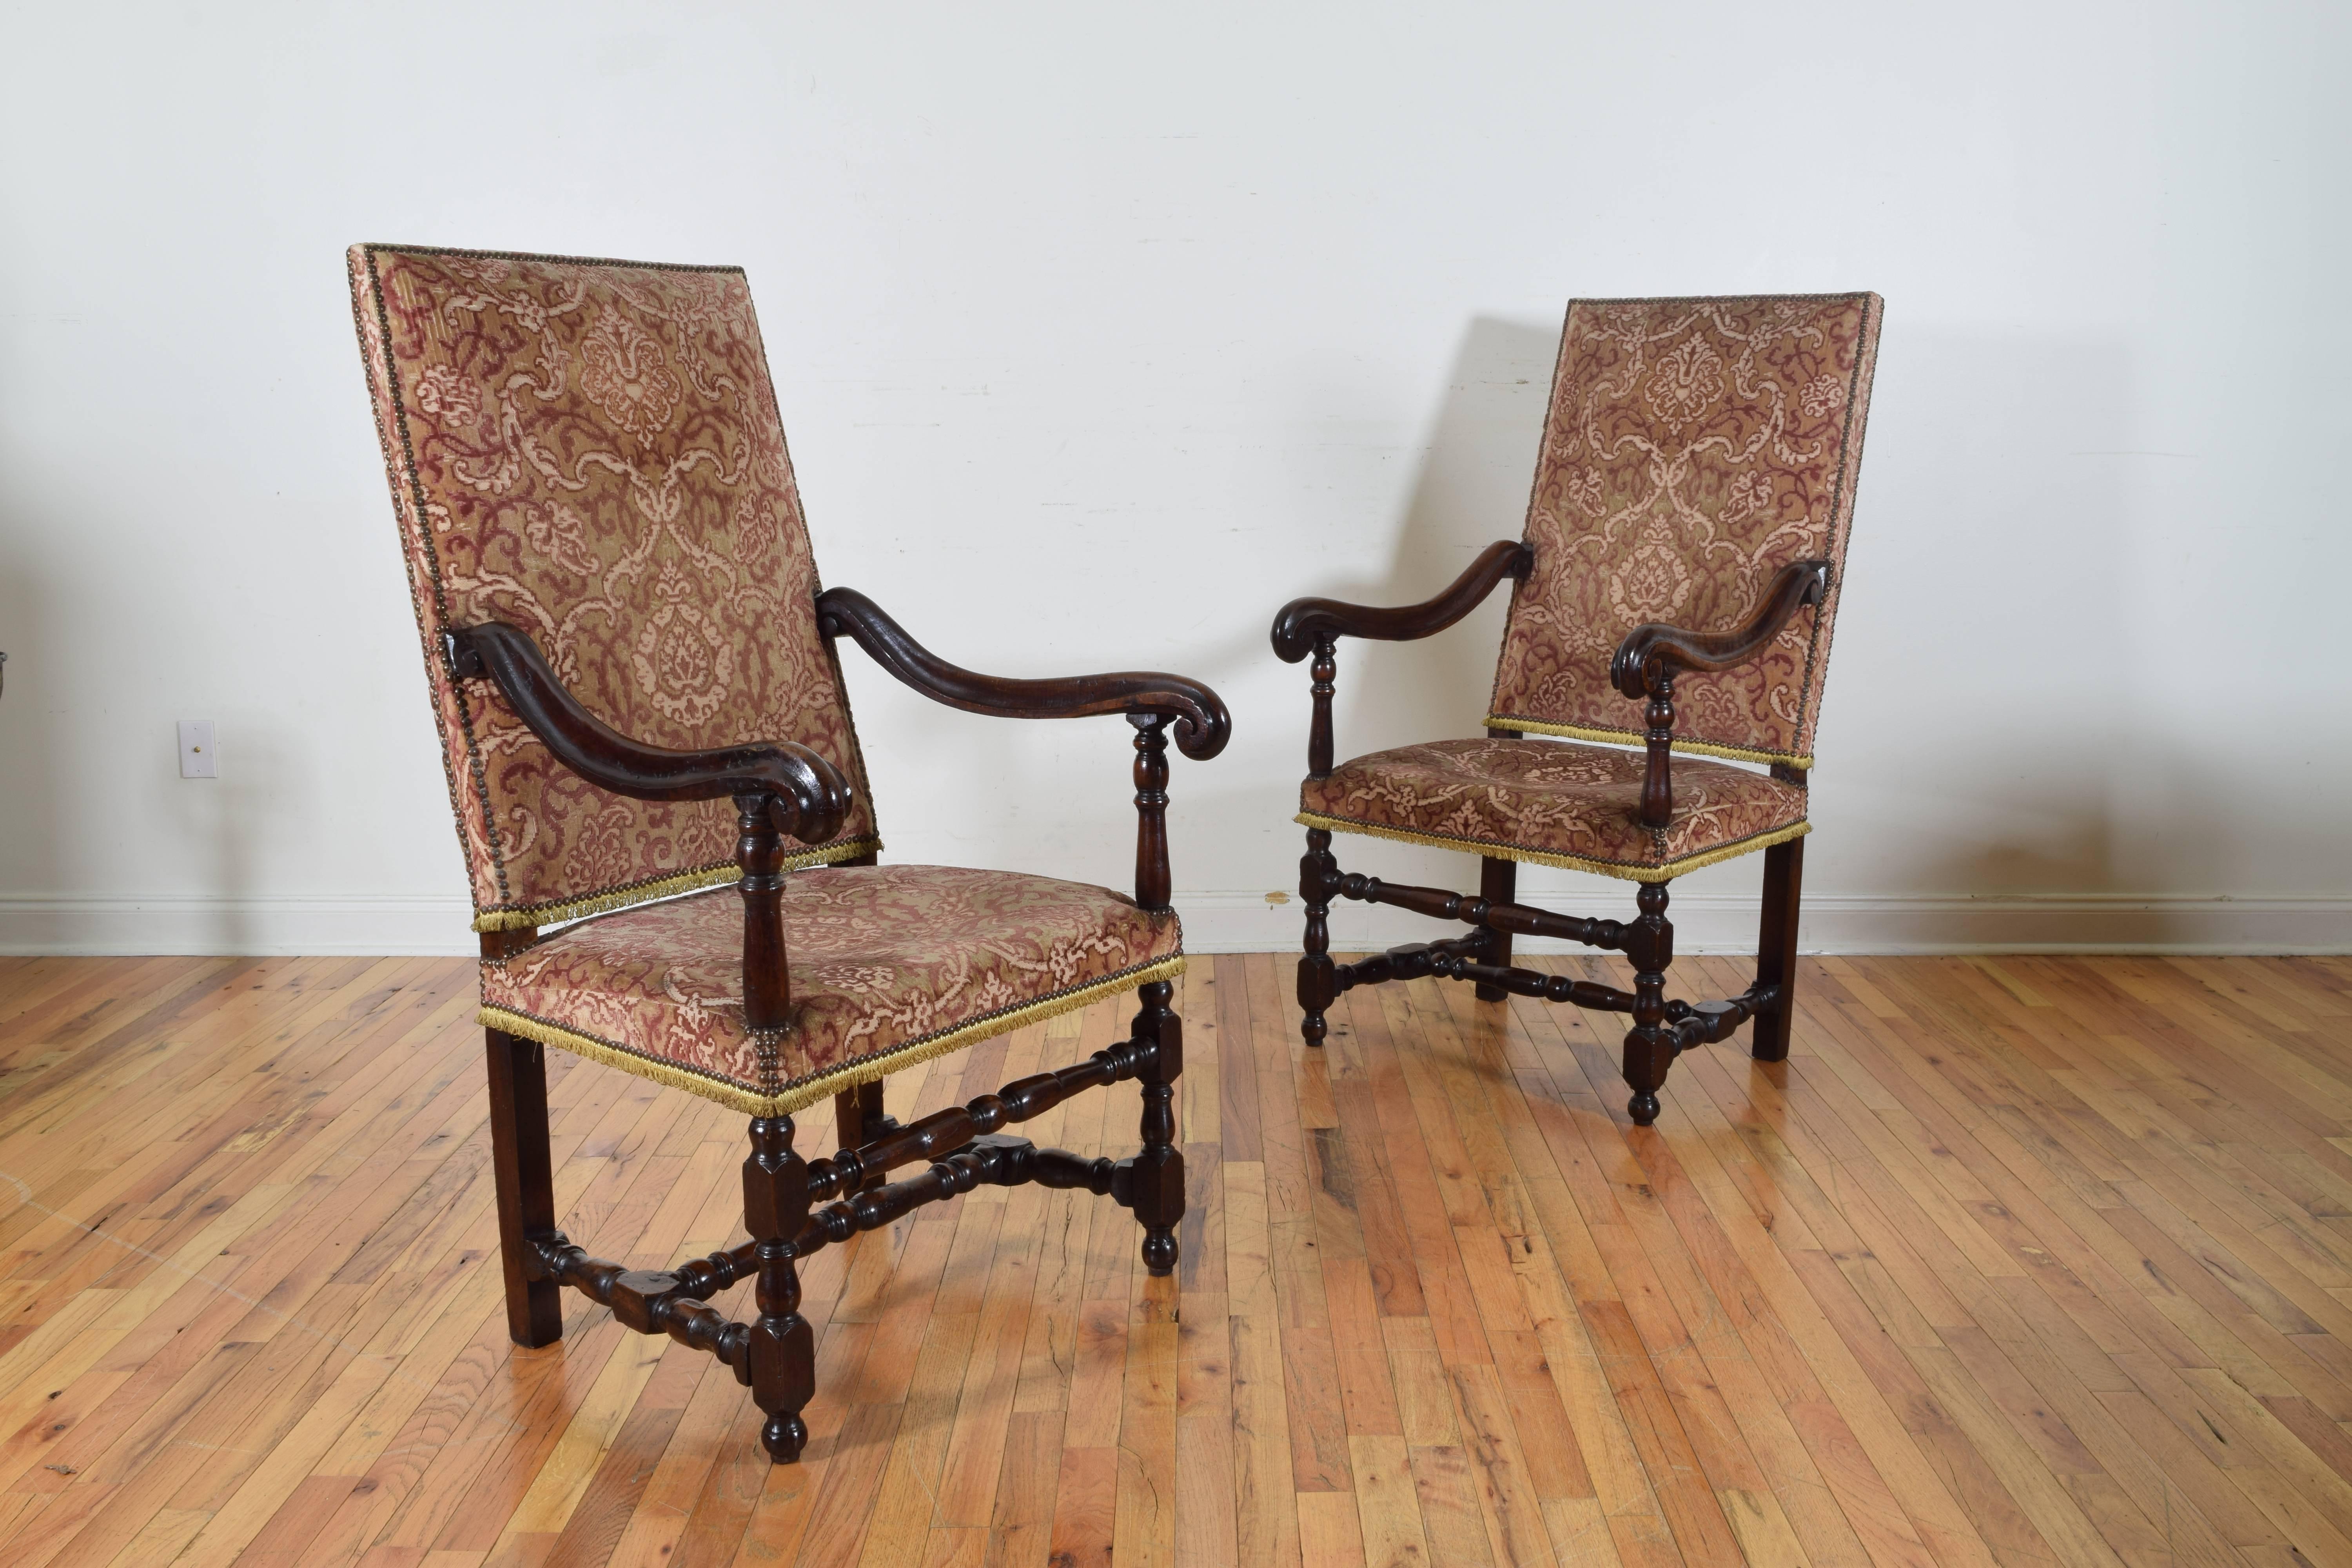 Pair of Louis XIII period armchairs. Cut velvet upholstered.